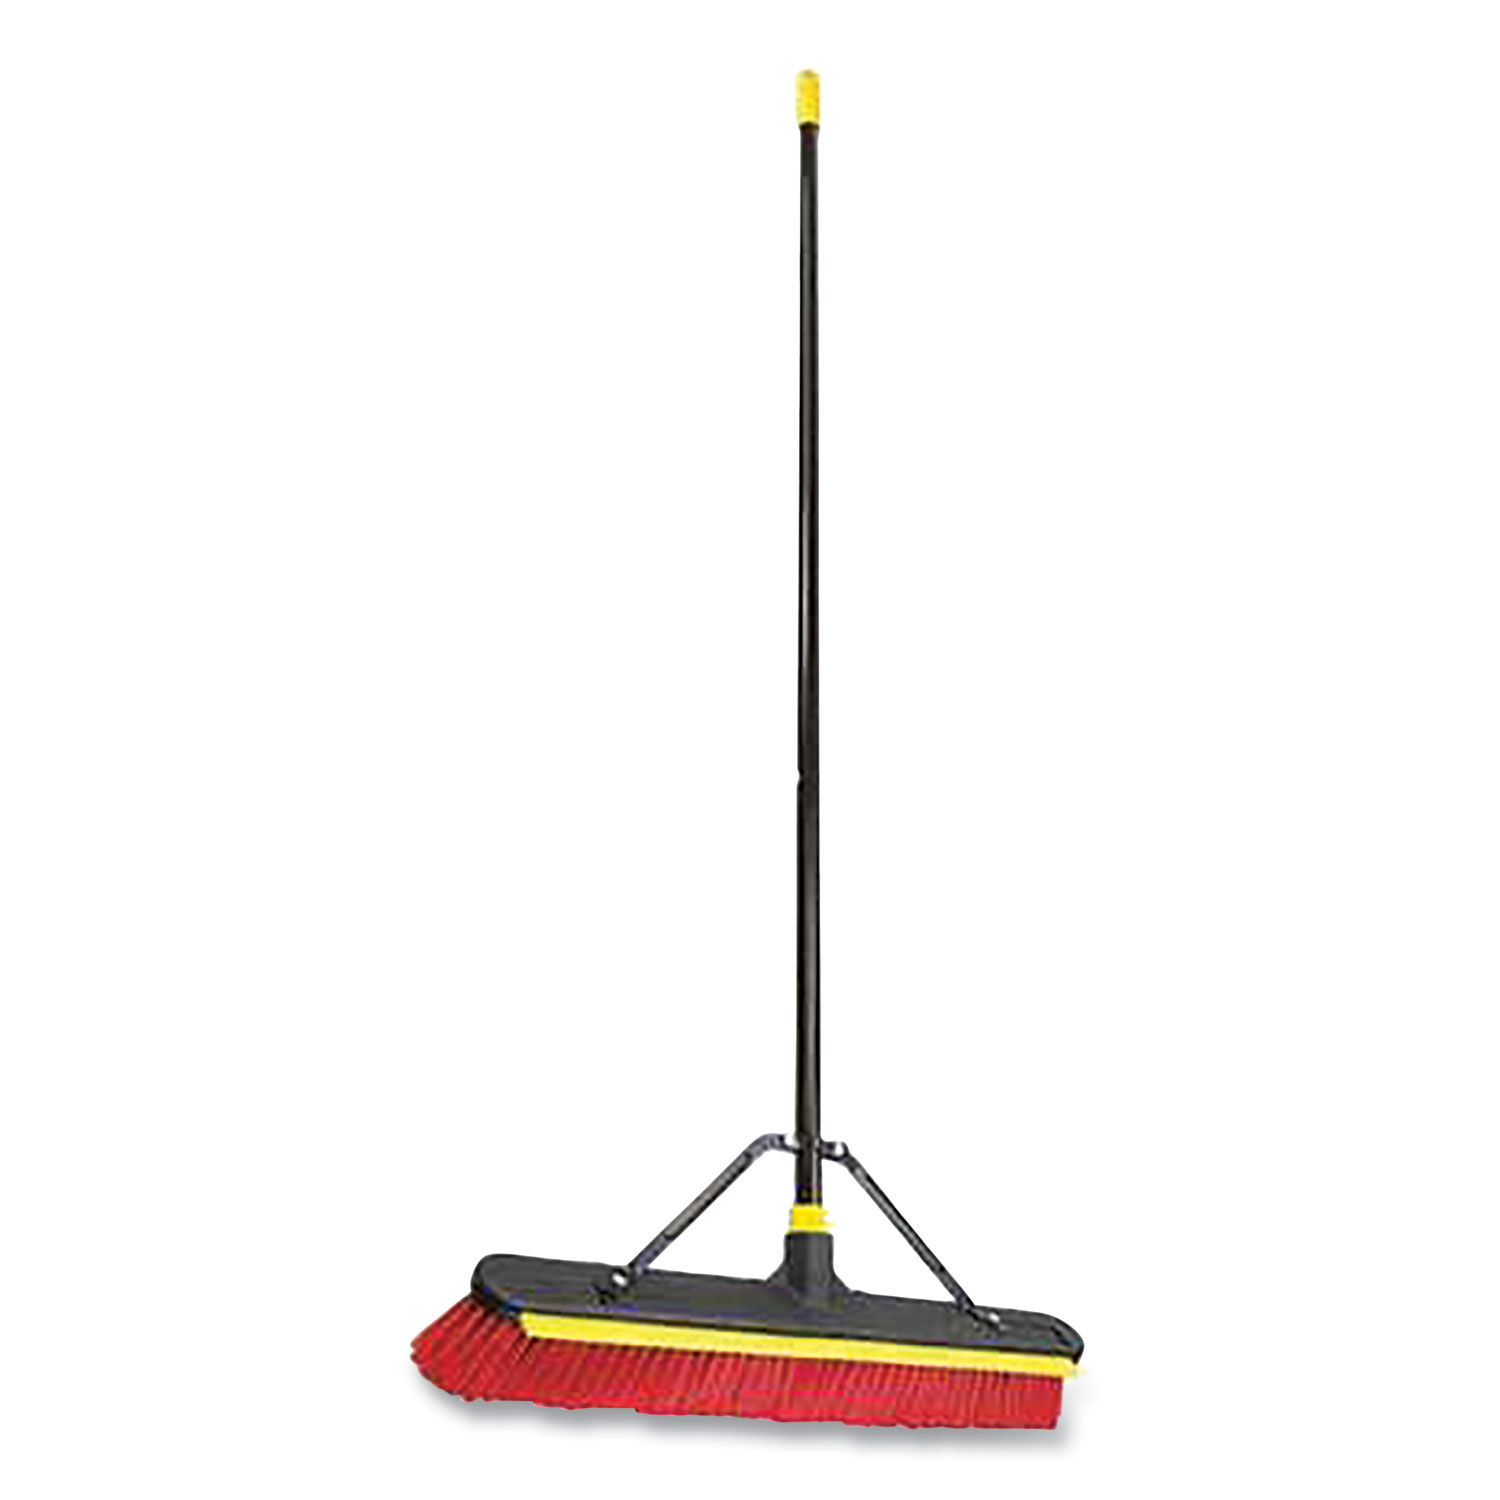 Bulldozer 2-in-1 Squeegee Pushbroom 24 x 54, PET Bristles, Finished Steel Handle, Black/Red/Yellow